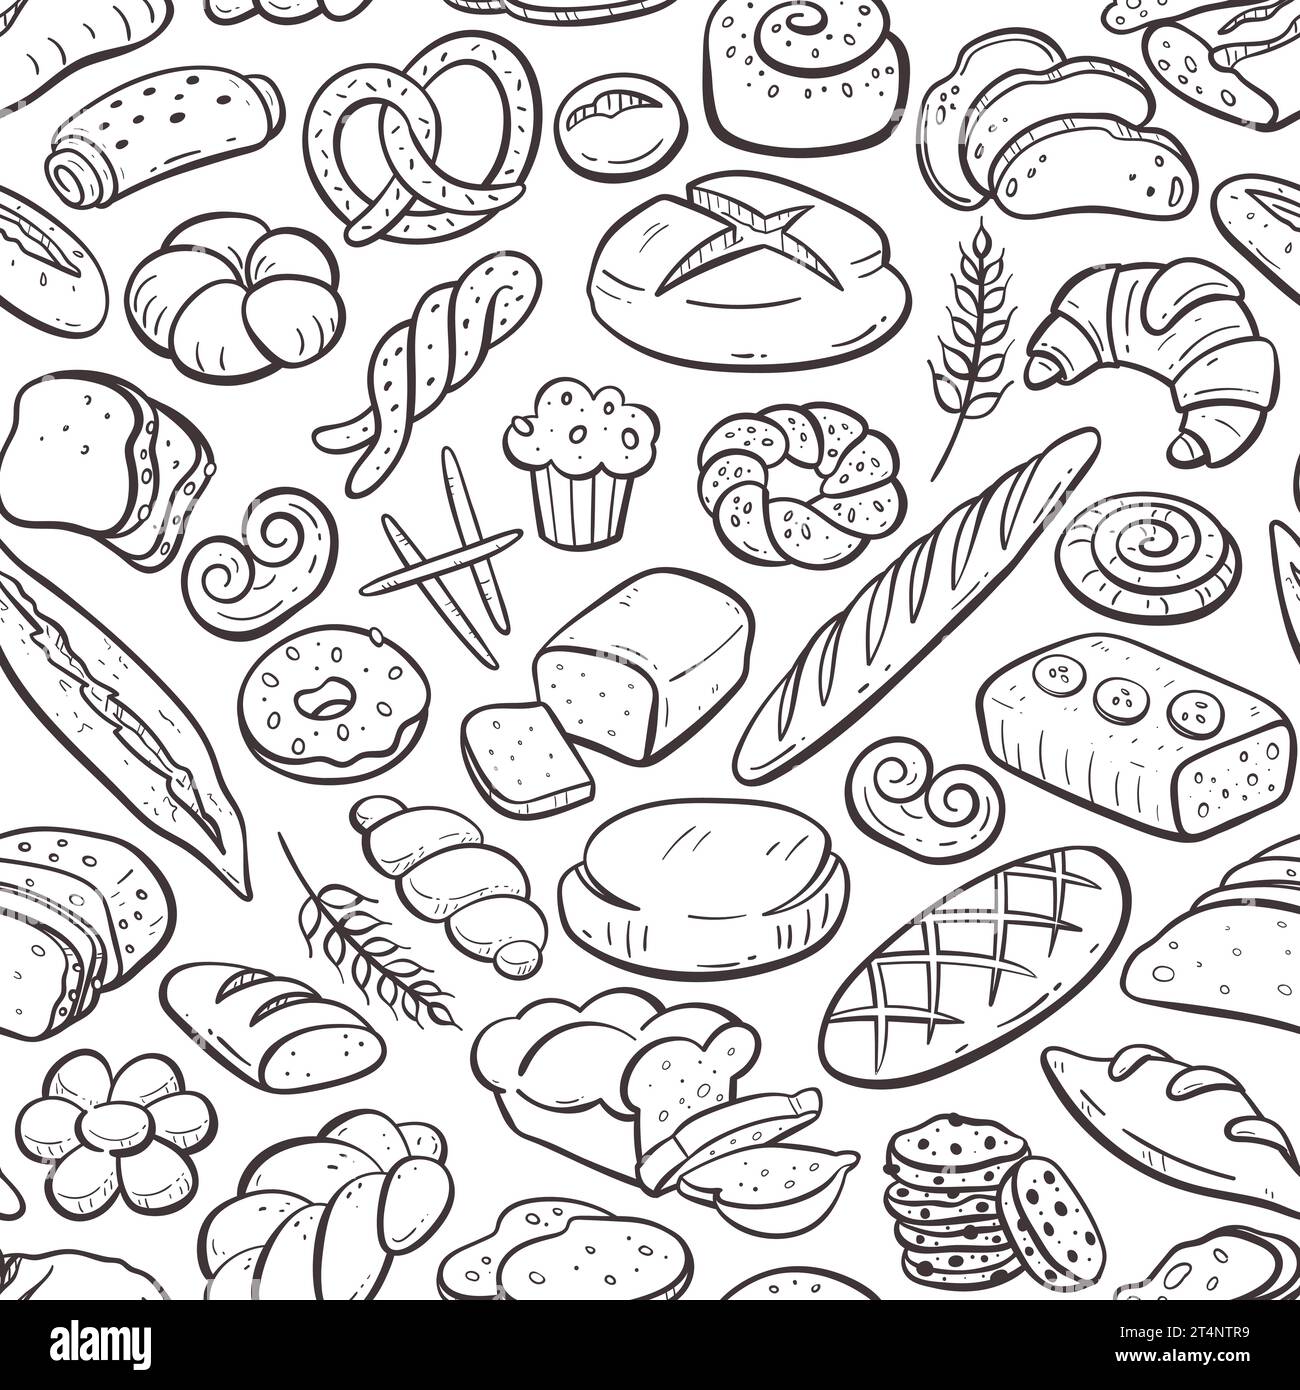 Bread and bakery products seamless pattern. Hand-drawn doodle illustration. Isolated baked good set. Repeat pattern. Vector illustration. Stock Vector